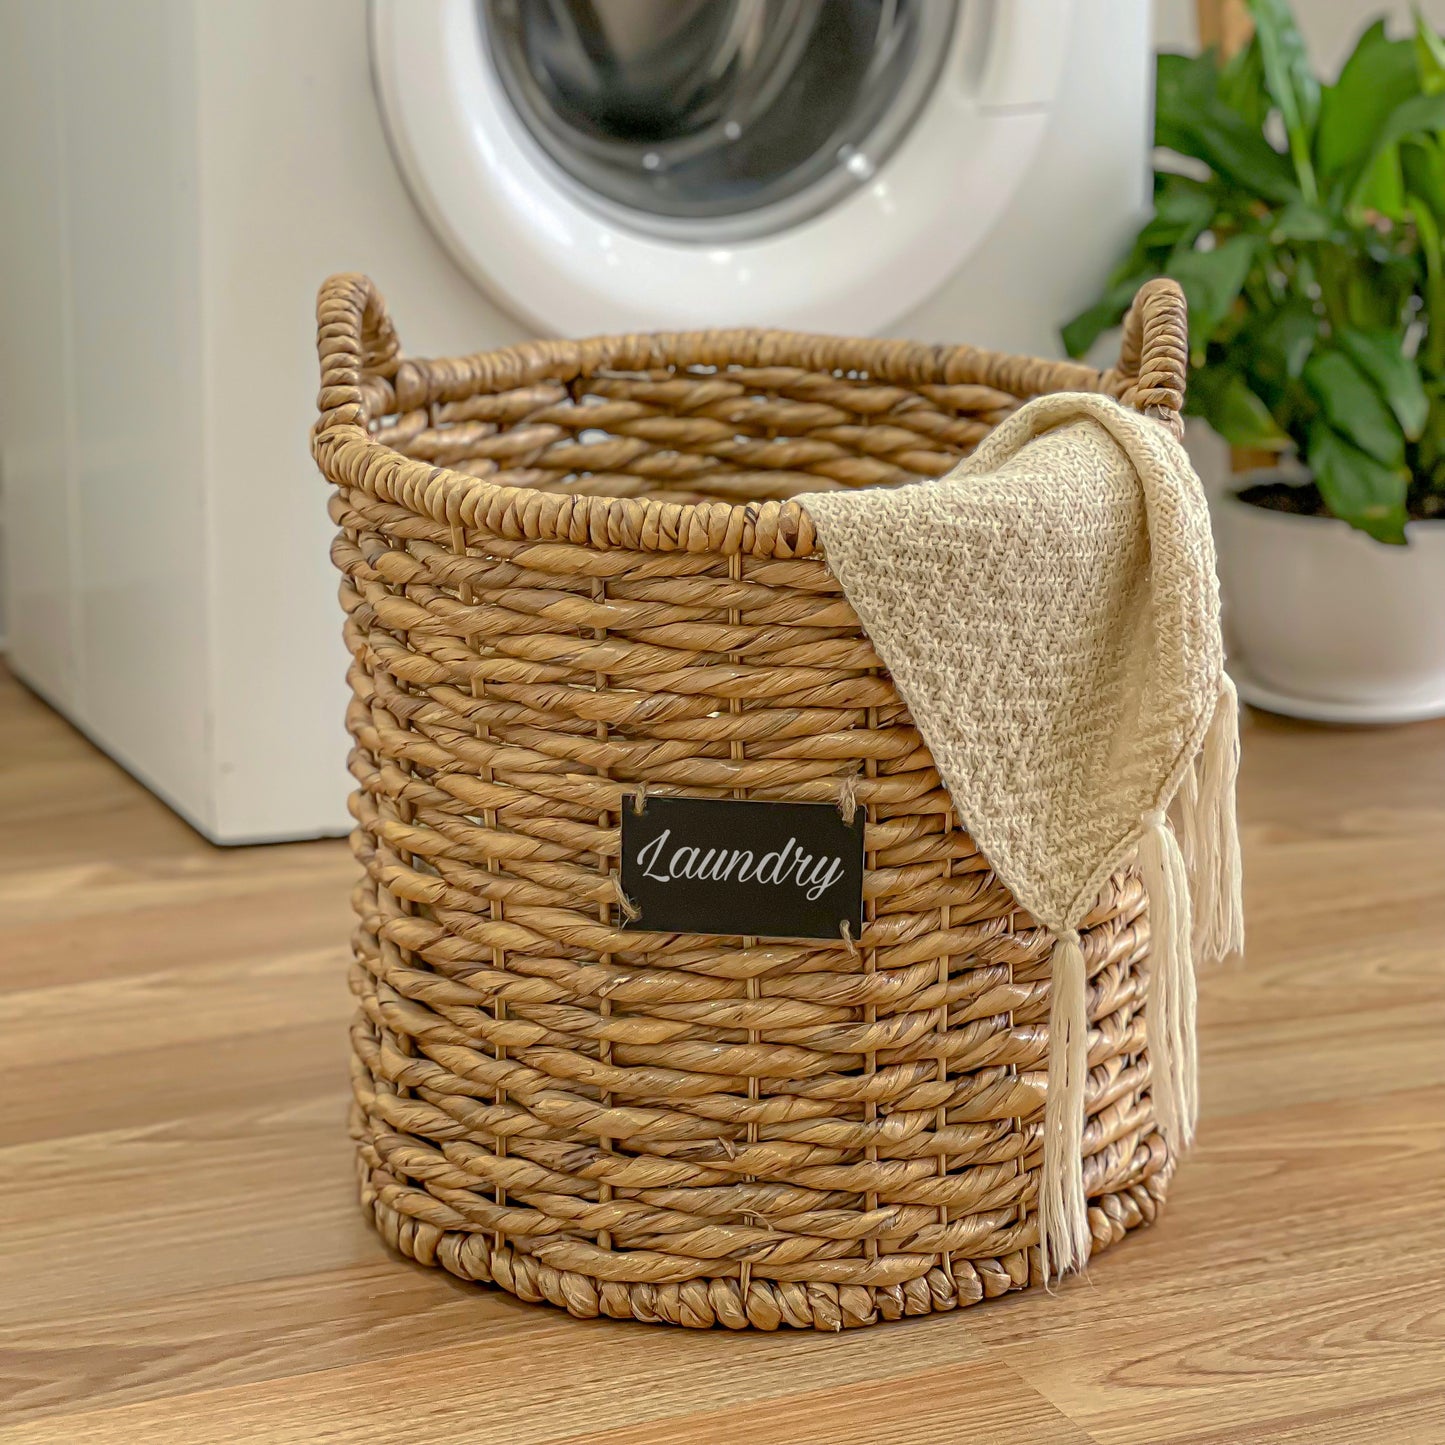 Dirty laundry basket with blackboard for sorting clothes